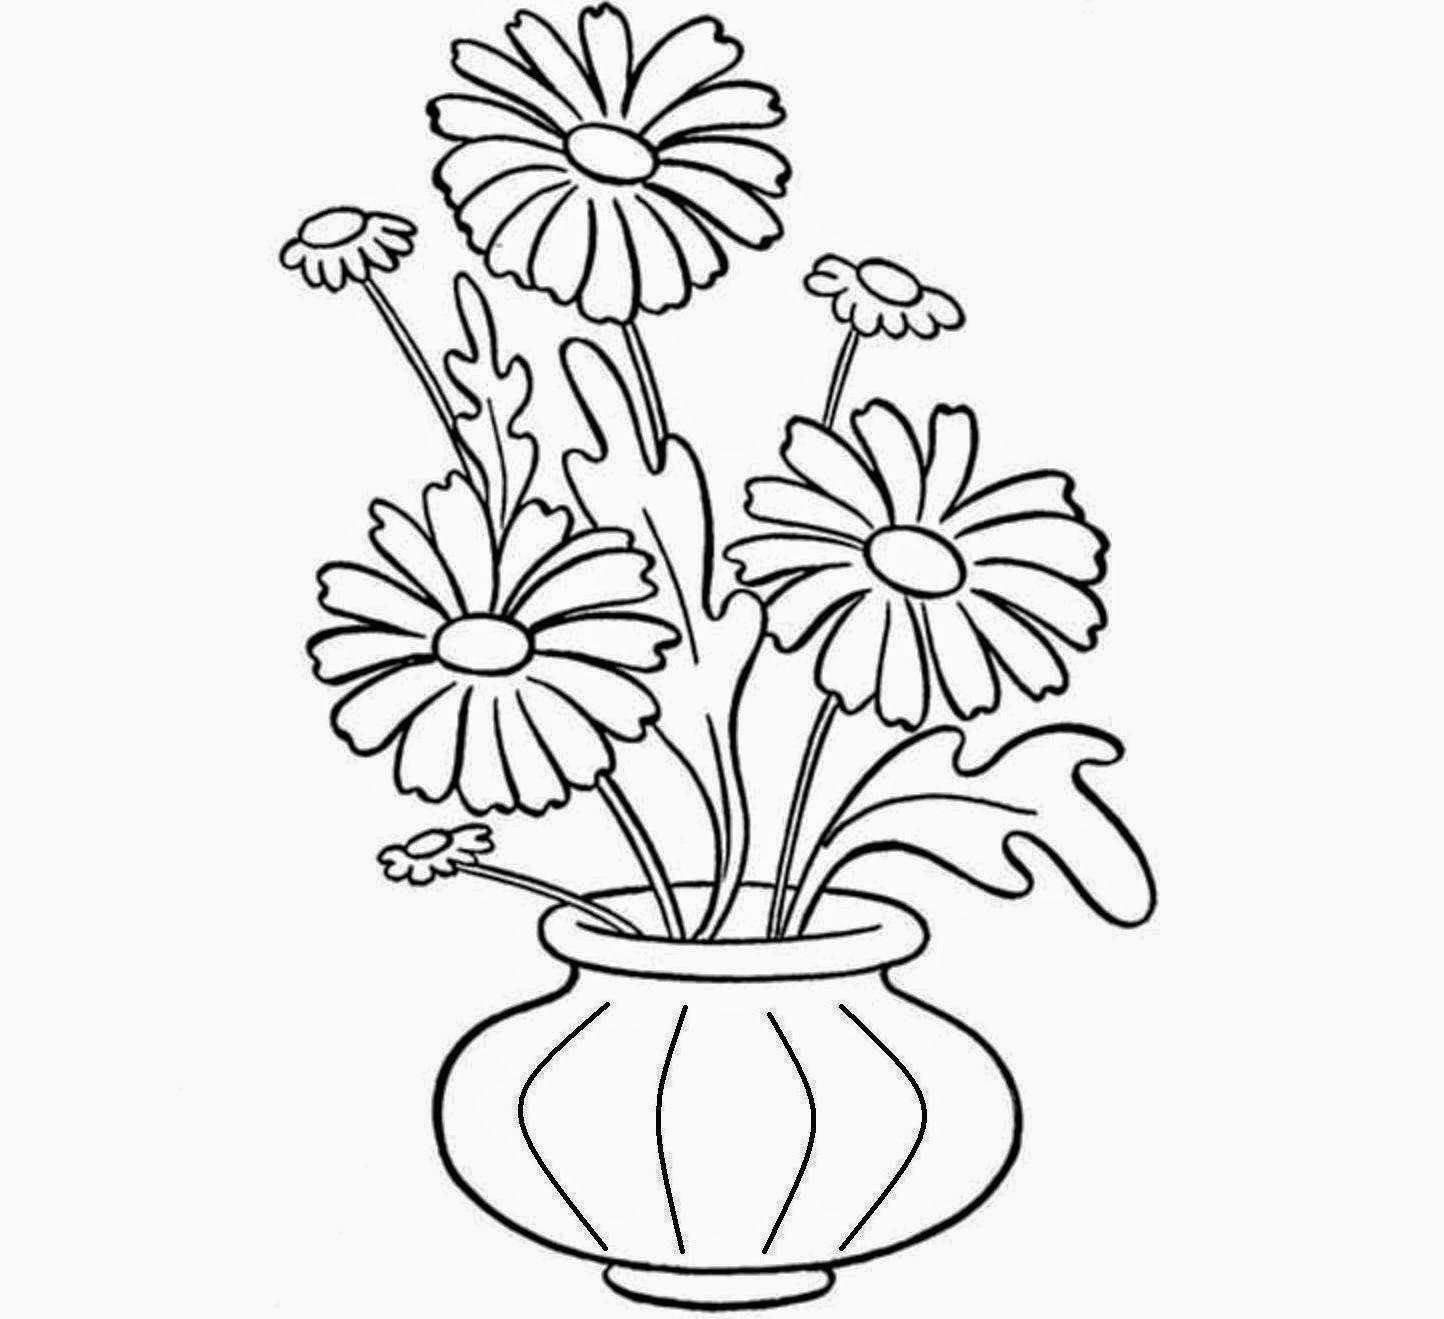 Easy Drawing Of Flower Garden Mind Blowing Tips Vases Vintage Glass Vases Garden Center Pieces